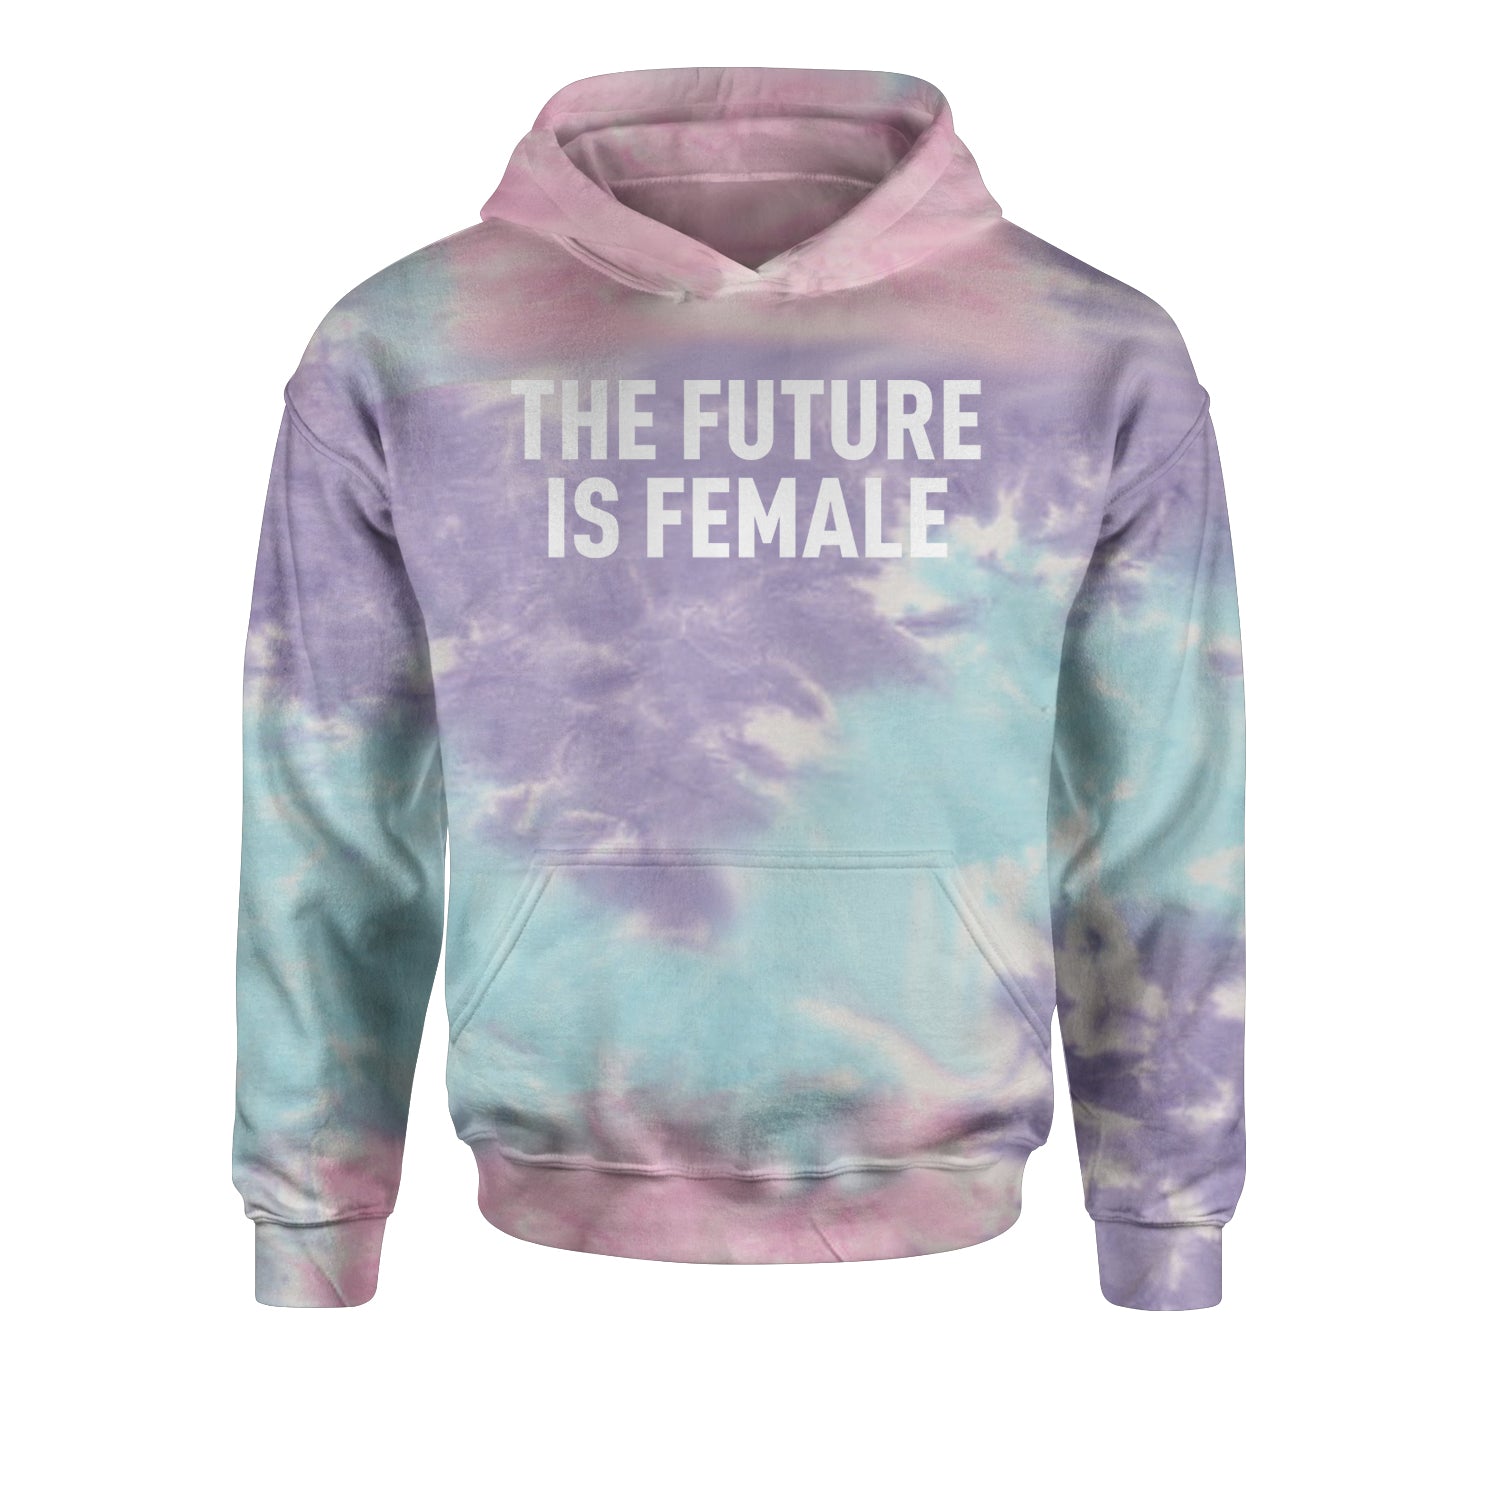 The Future Is Female Feminism Youth-Sized Hoodie female, feminism, feminist, femme, future, is, liberation, suffrage, the by Expression Tees